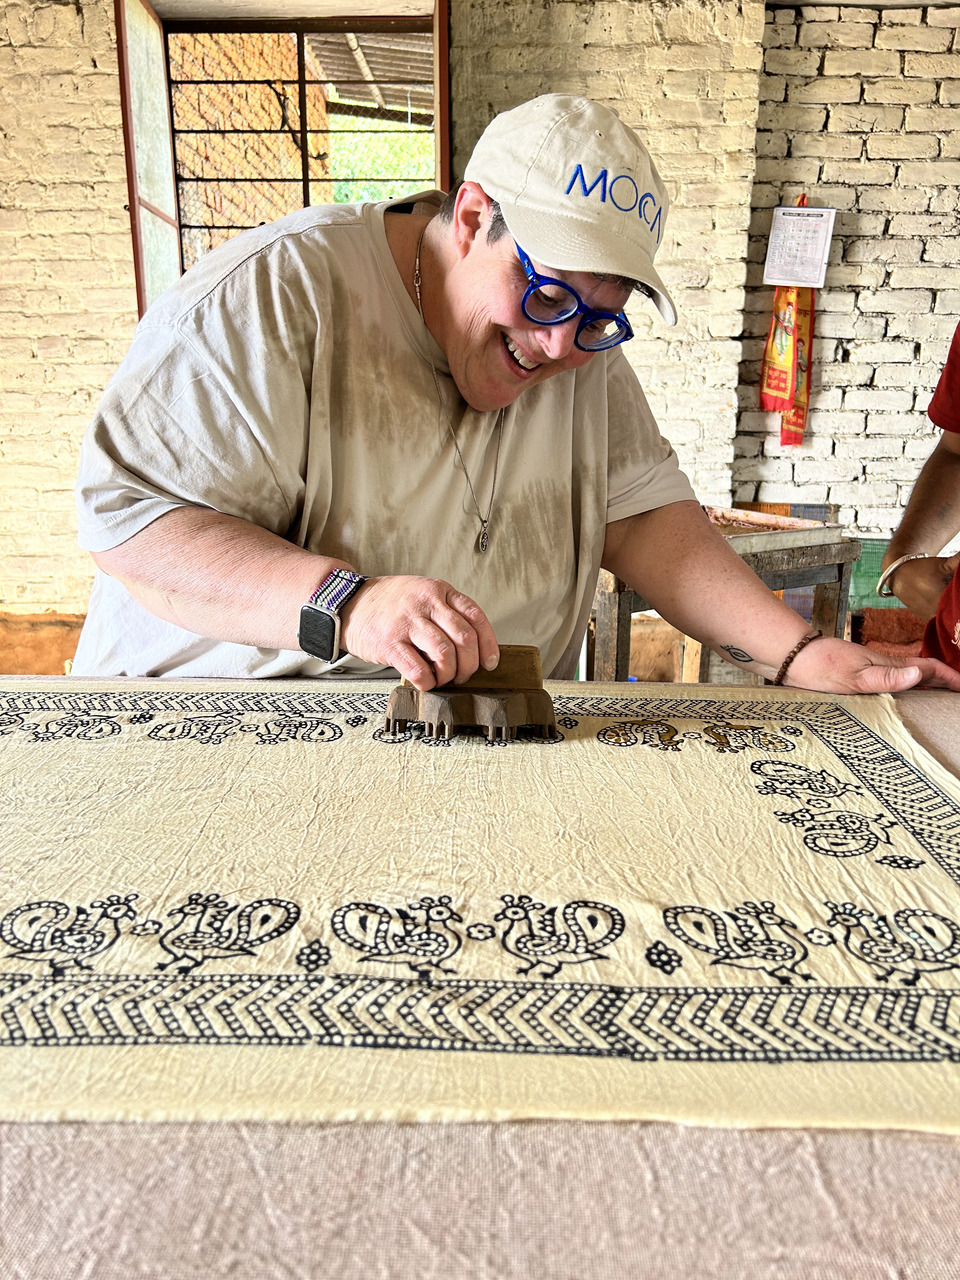 A woman in the process of completing her block printed pattern.